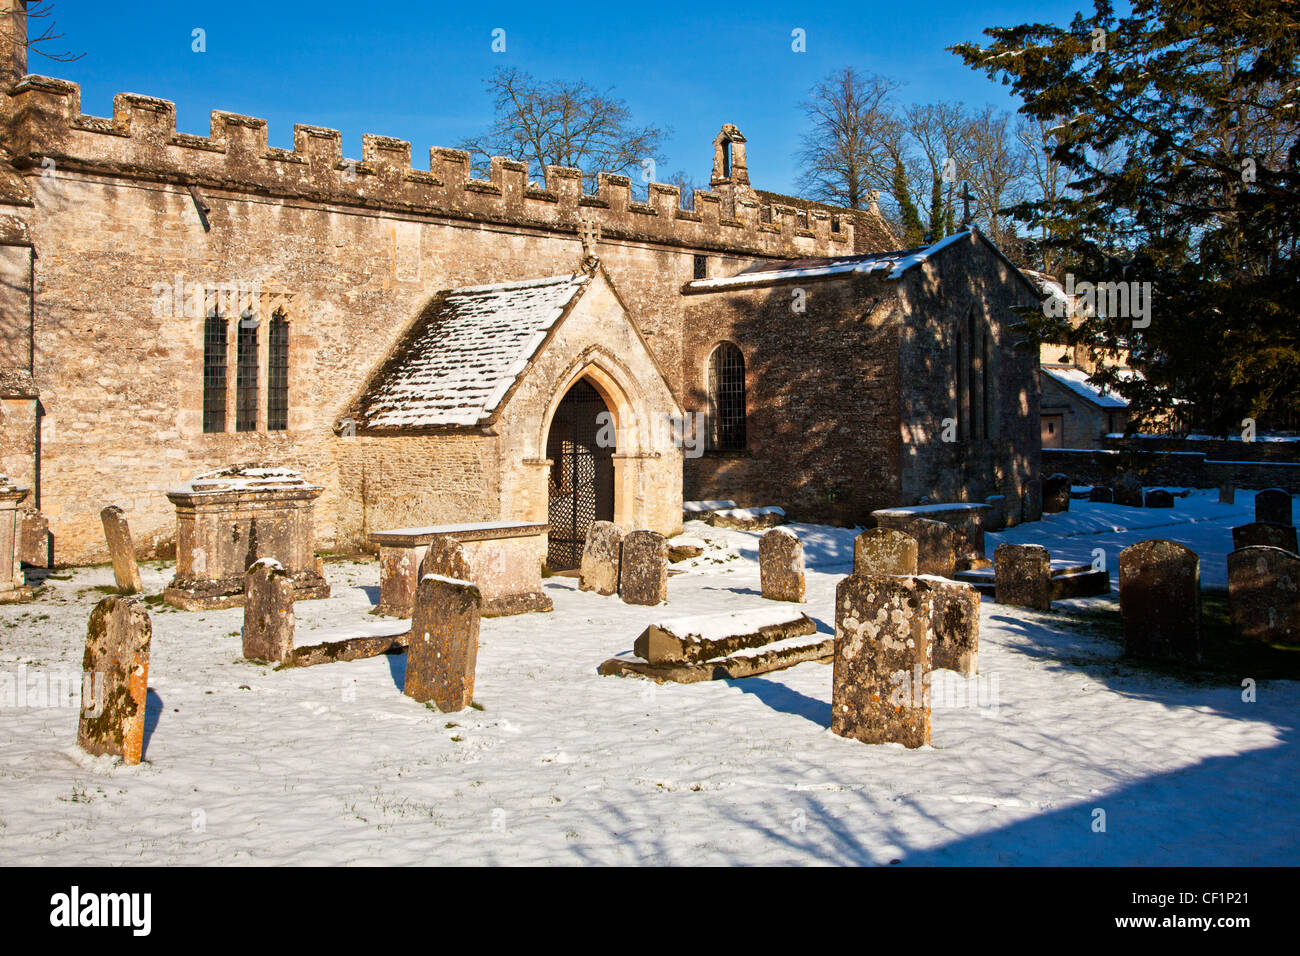 Snowy winter view of the Church of the Holy Rood or Cross in the Cotswold village of Ampney Crucis, Gloucestershire, England, UK Stock Photo